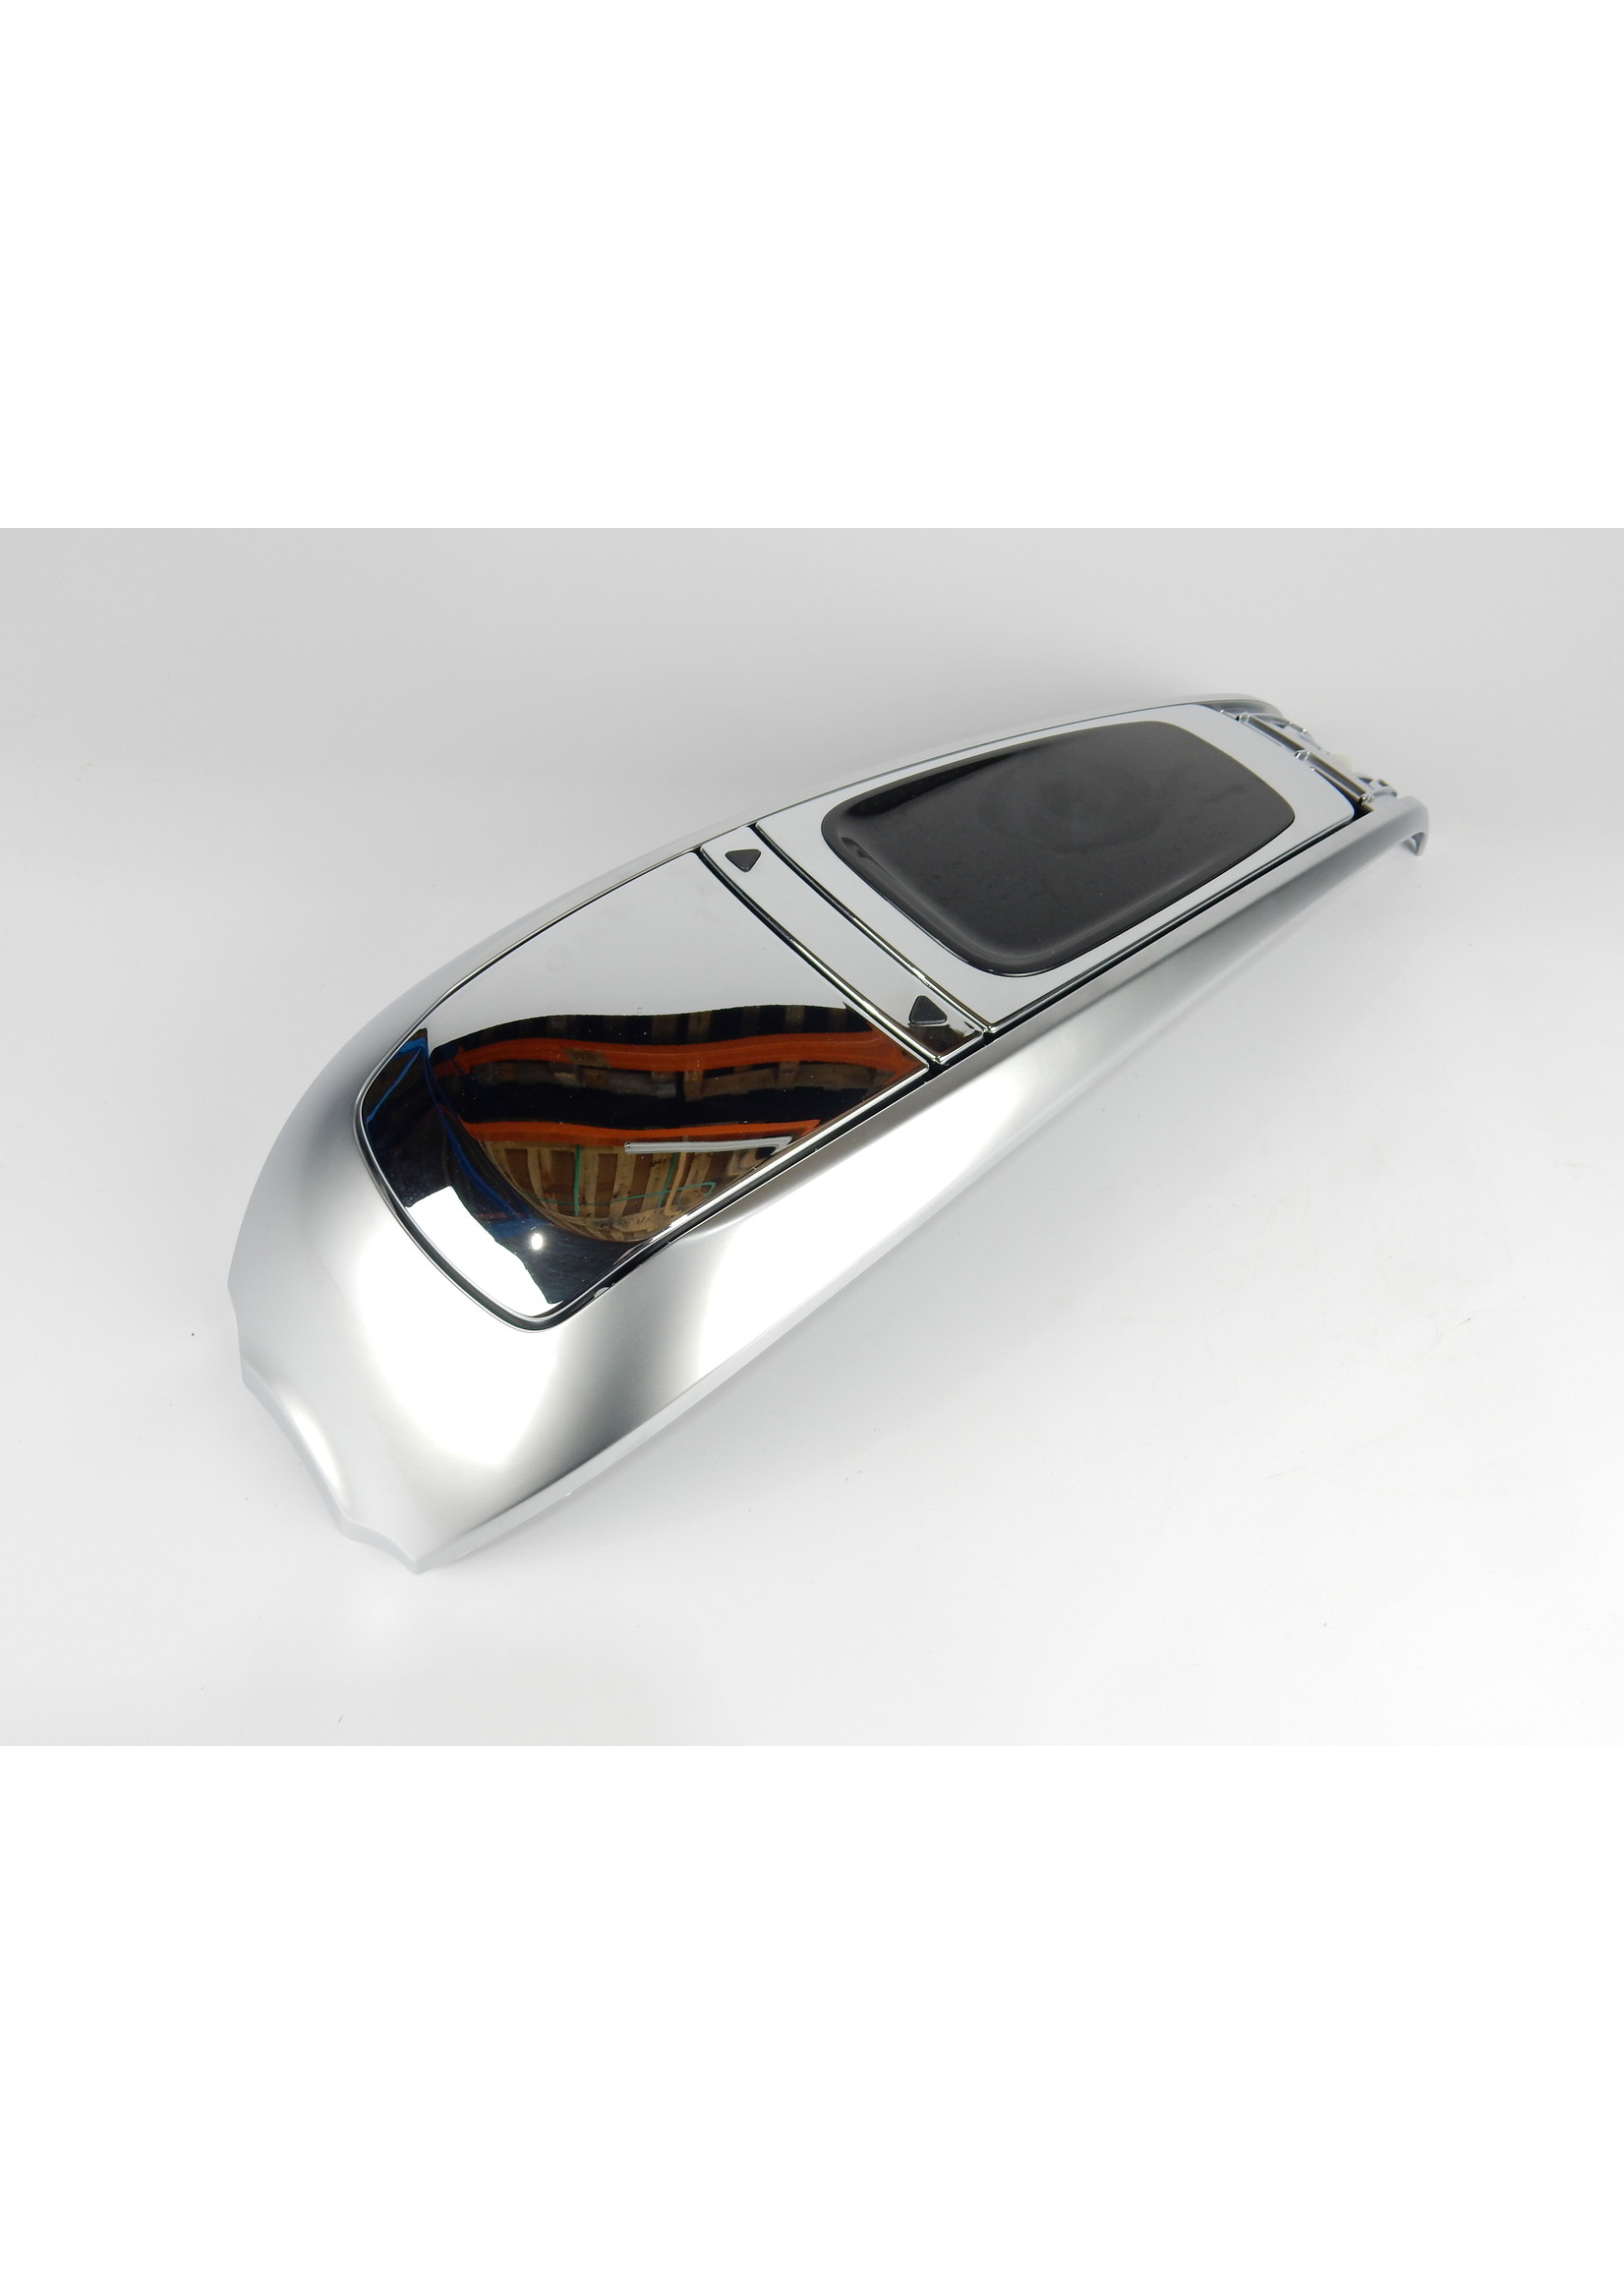 BMW BMW R18 B Transcontinental Tank trim centre CHROME / Storage compartment with charger / 46639829170 / 46639830137